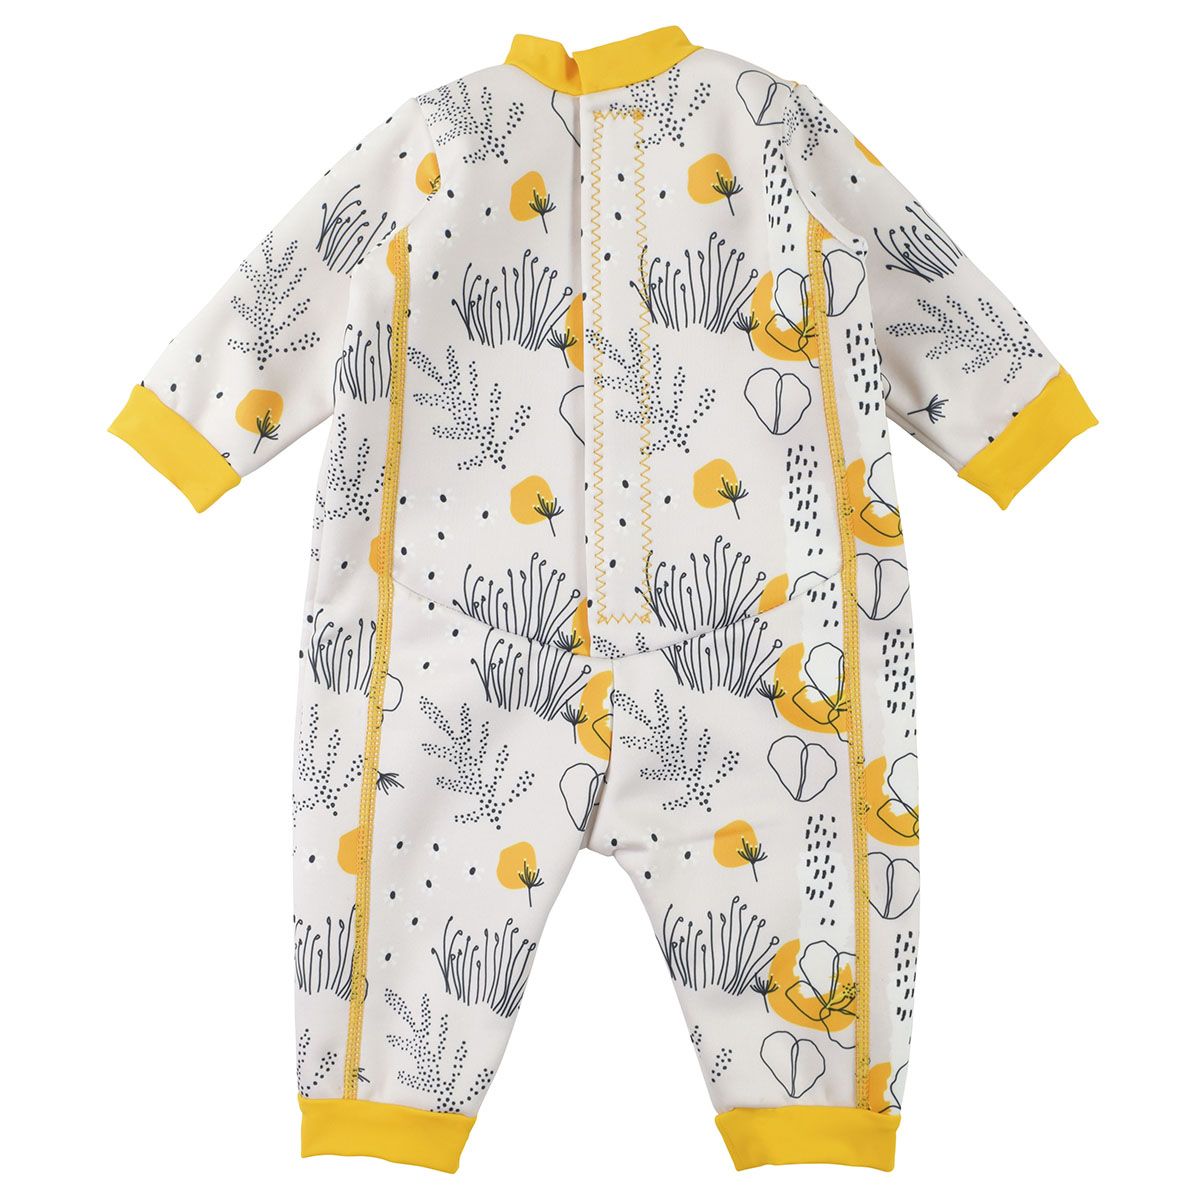 Fleece-lined baby wetsuit in white with yellow trims and minimalist floral print. Back.